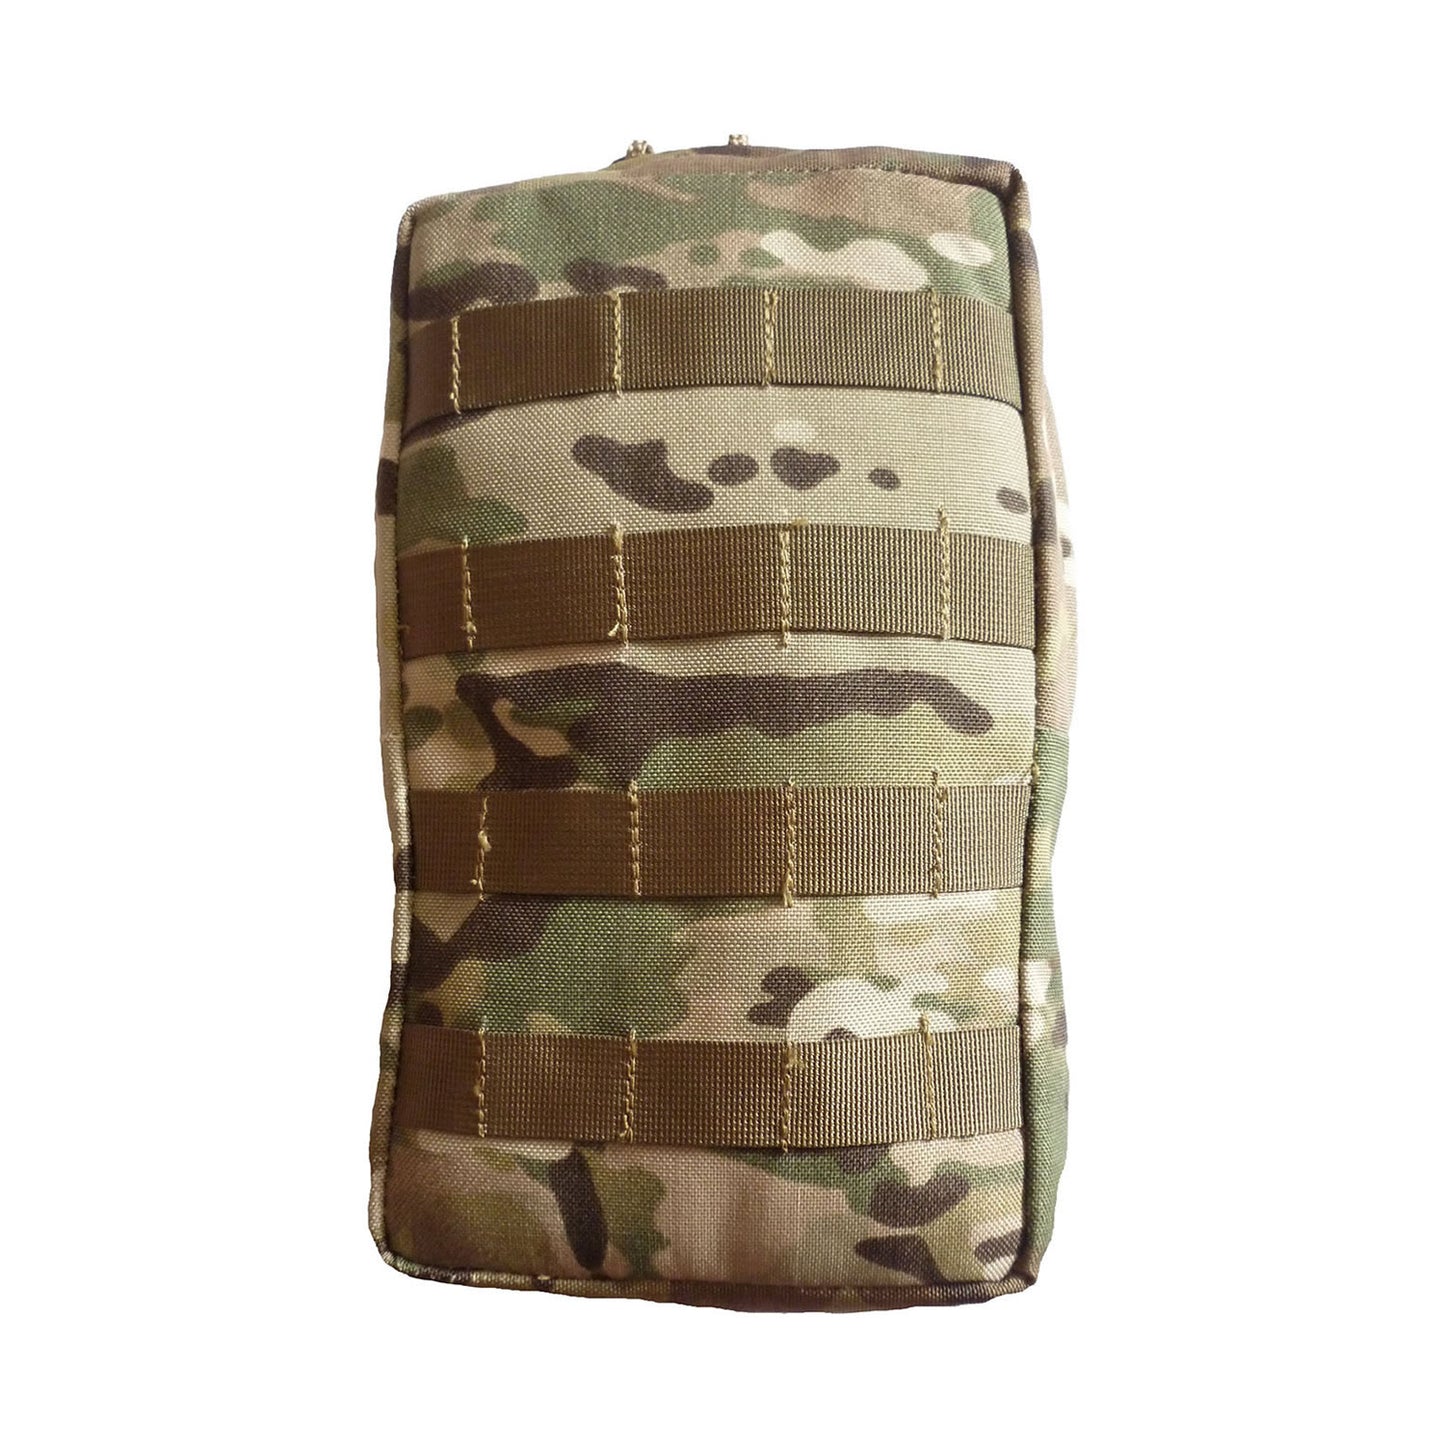 This rugged pouch can handle any challenge with 2LT SA canteen capacity and MOLLE capability. Press studs crafted from corrosion-resistant copper, plus drain holes in the base, make it an ideal companion for military, cadet, and outdoor activities. Its dimensions of 25x17x11cm give you ample storage! www.defenceqstore.com.au